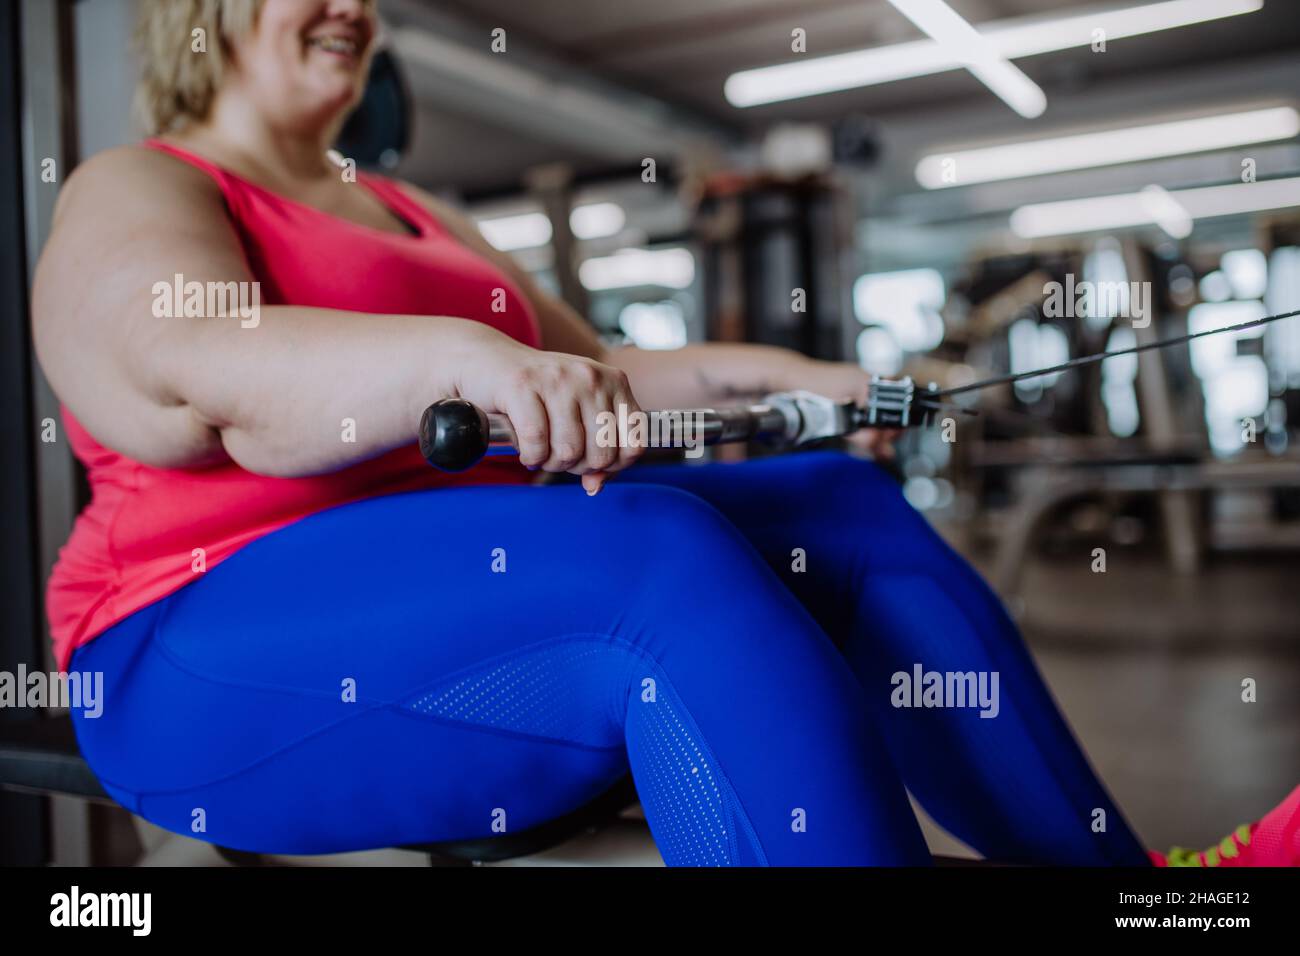 Unrecognizable plus size woman training on rowing machine machine indoors in gym Stock Photo